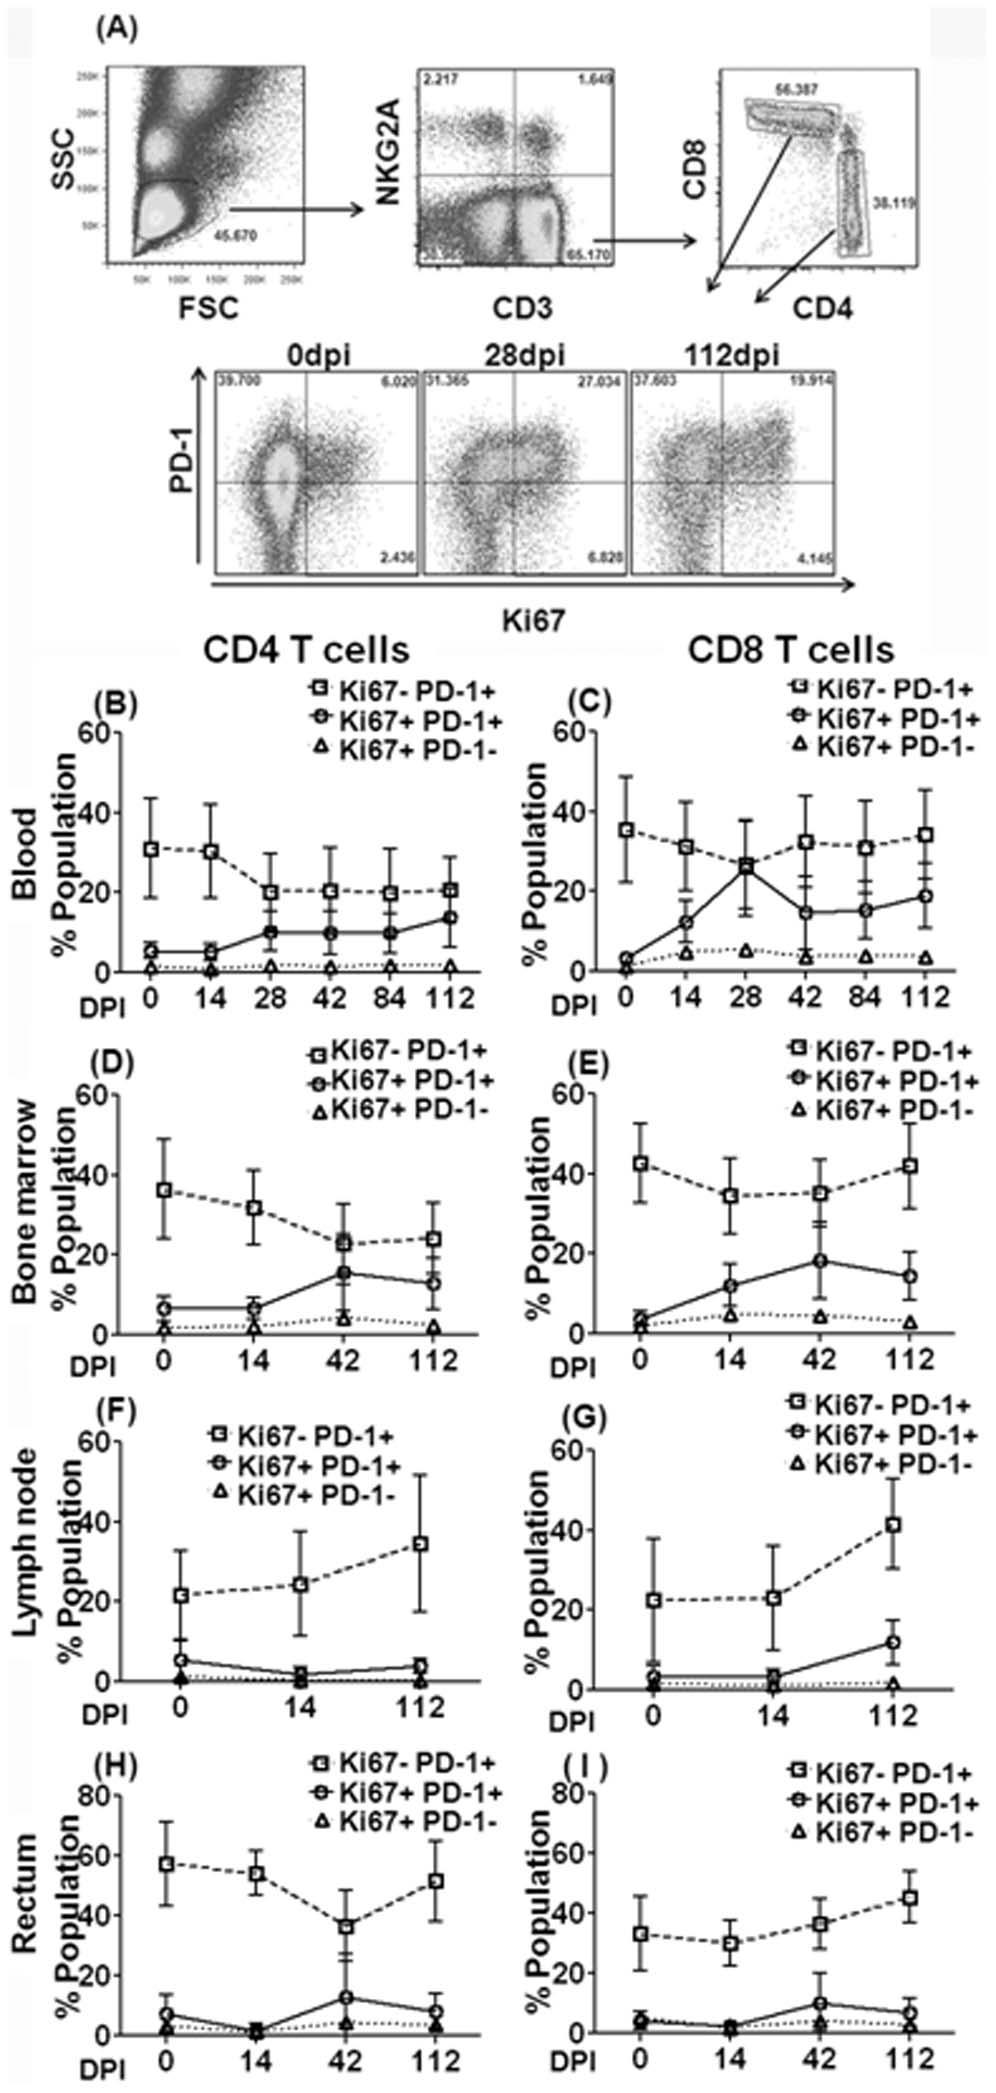 cells during ART and an increase in Ki67 + PD-1 negative CD4 T cells correlating with the viral rebound, similar to CD8 T cells.